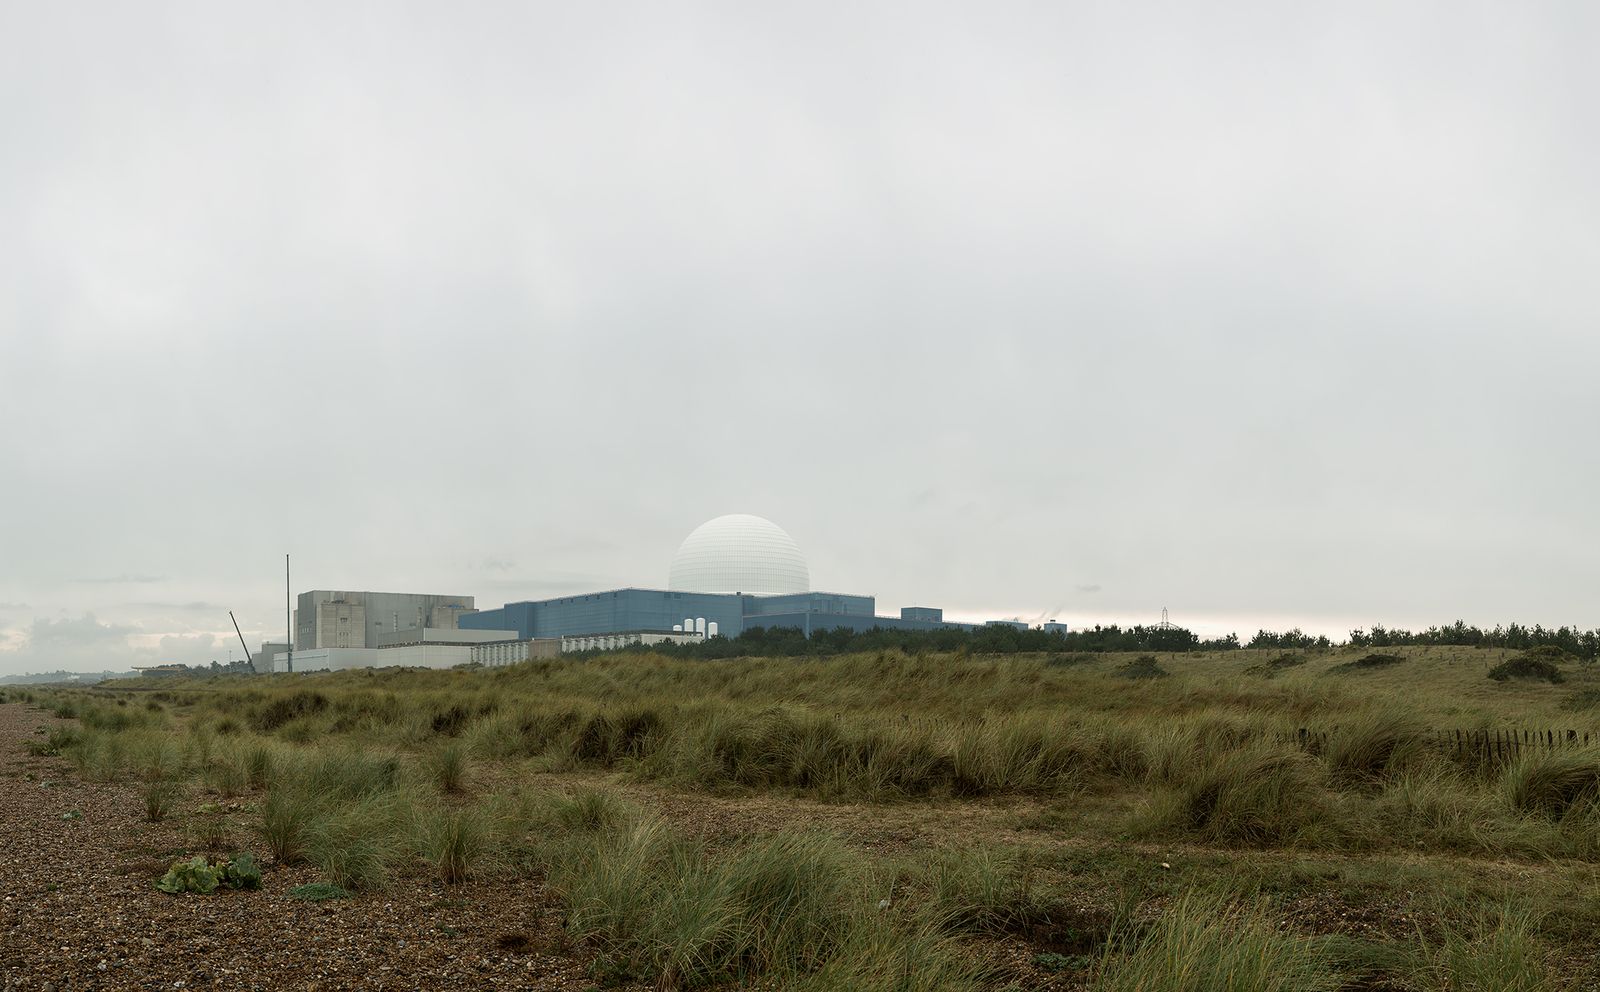 © Marco Caterini - Sizewell Nuclear Power Station, Sizewell, England 2014